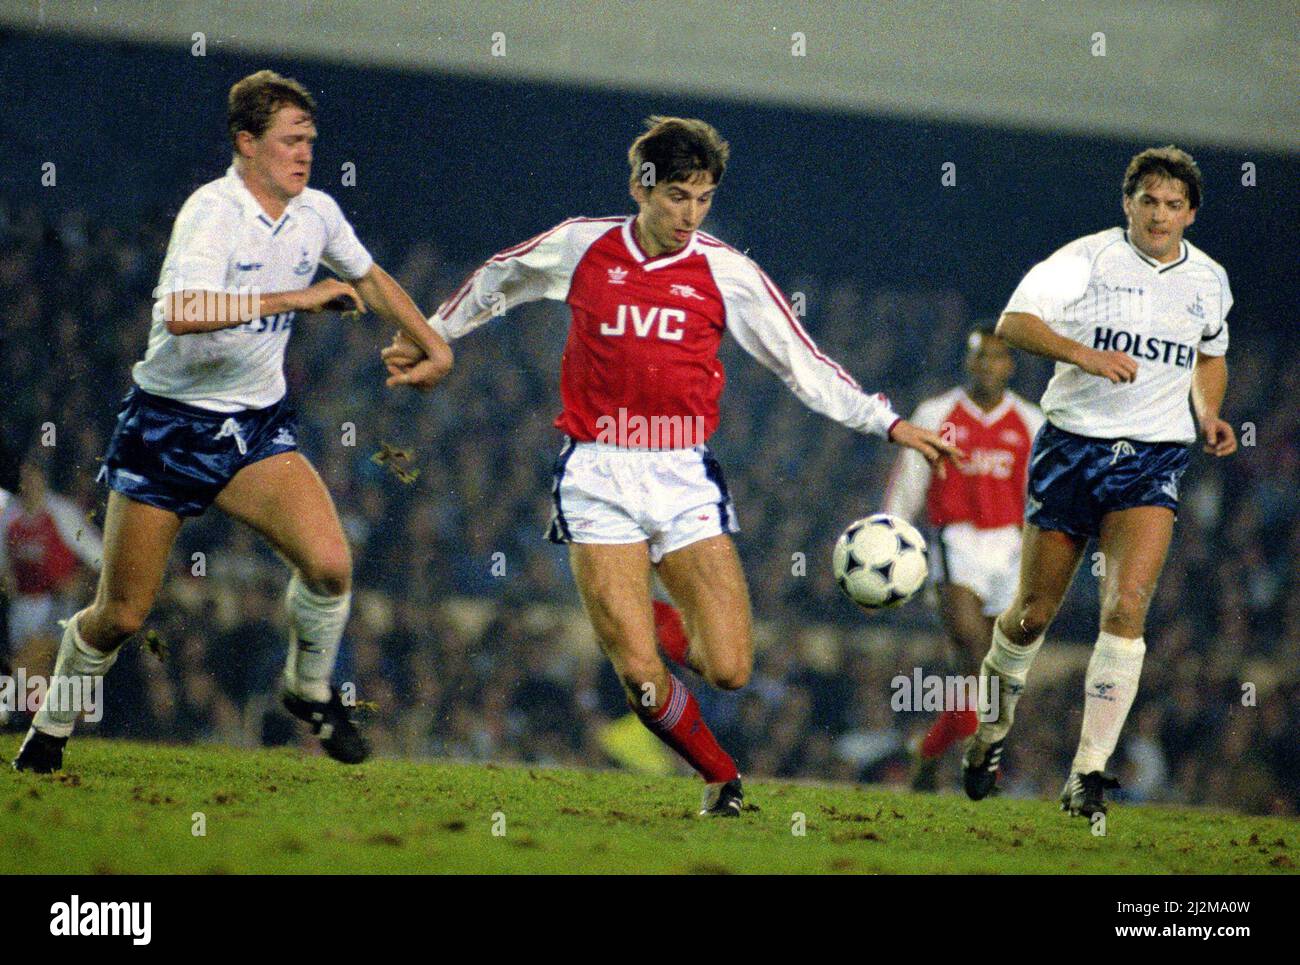 Football English League Division One 1988/89 Season. Arsenal 2 v Tottenham Hotspur 0  at Highbury Arsenal's Alan Smith causing problems for the Spurs defence Stock Photo